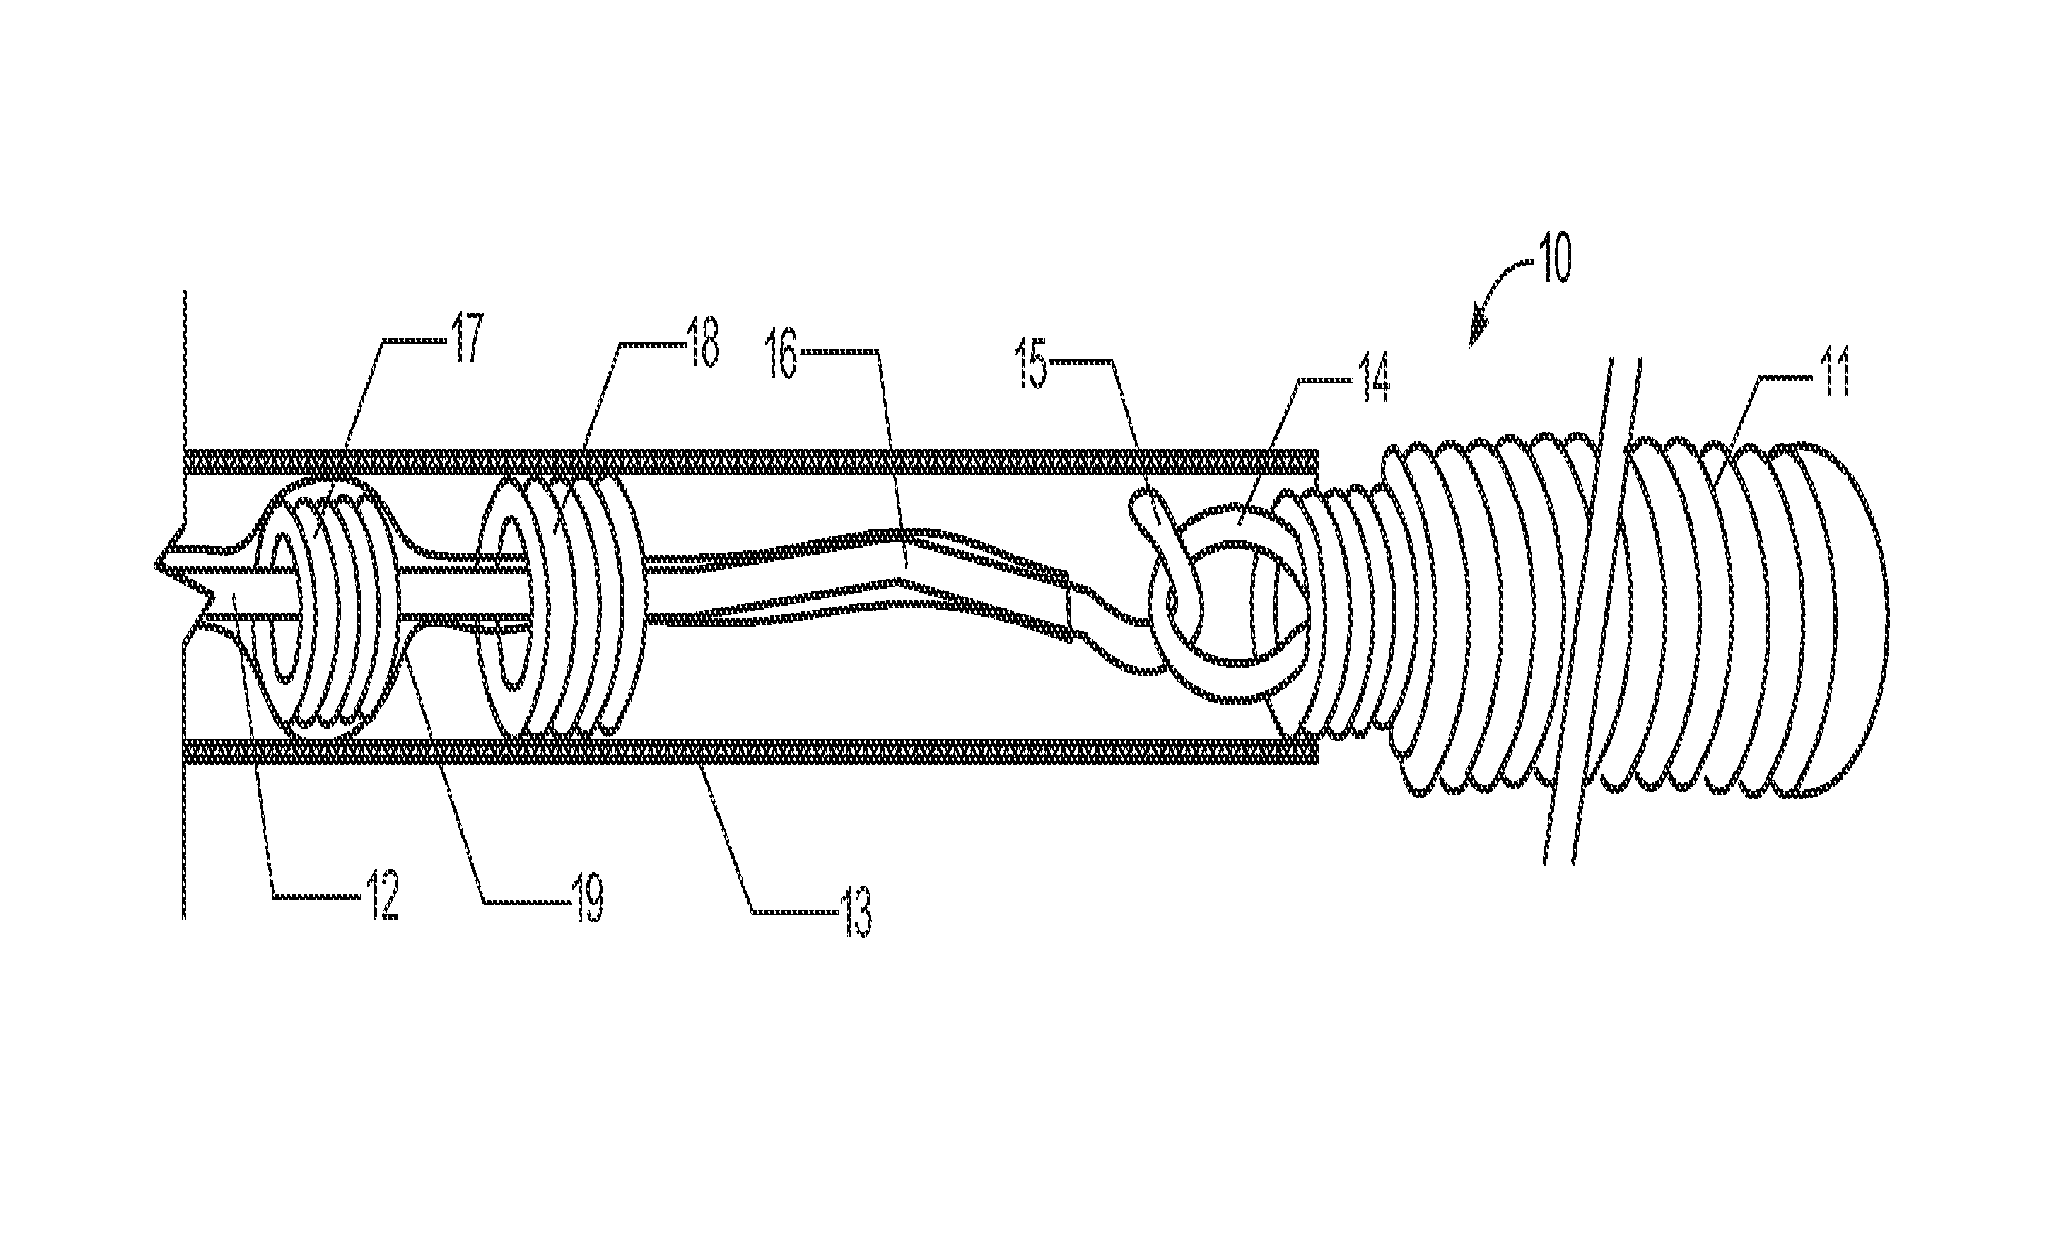 Delivery assembly for occlusion device using mechanical interlocking coupling mechanism